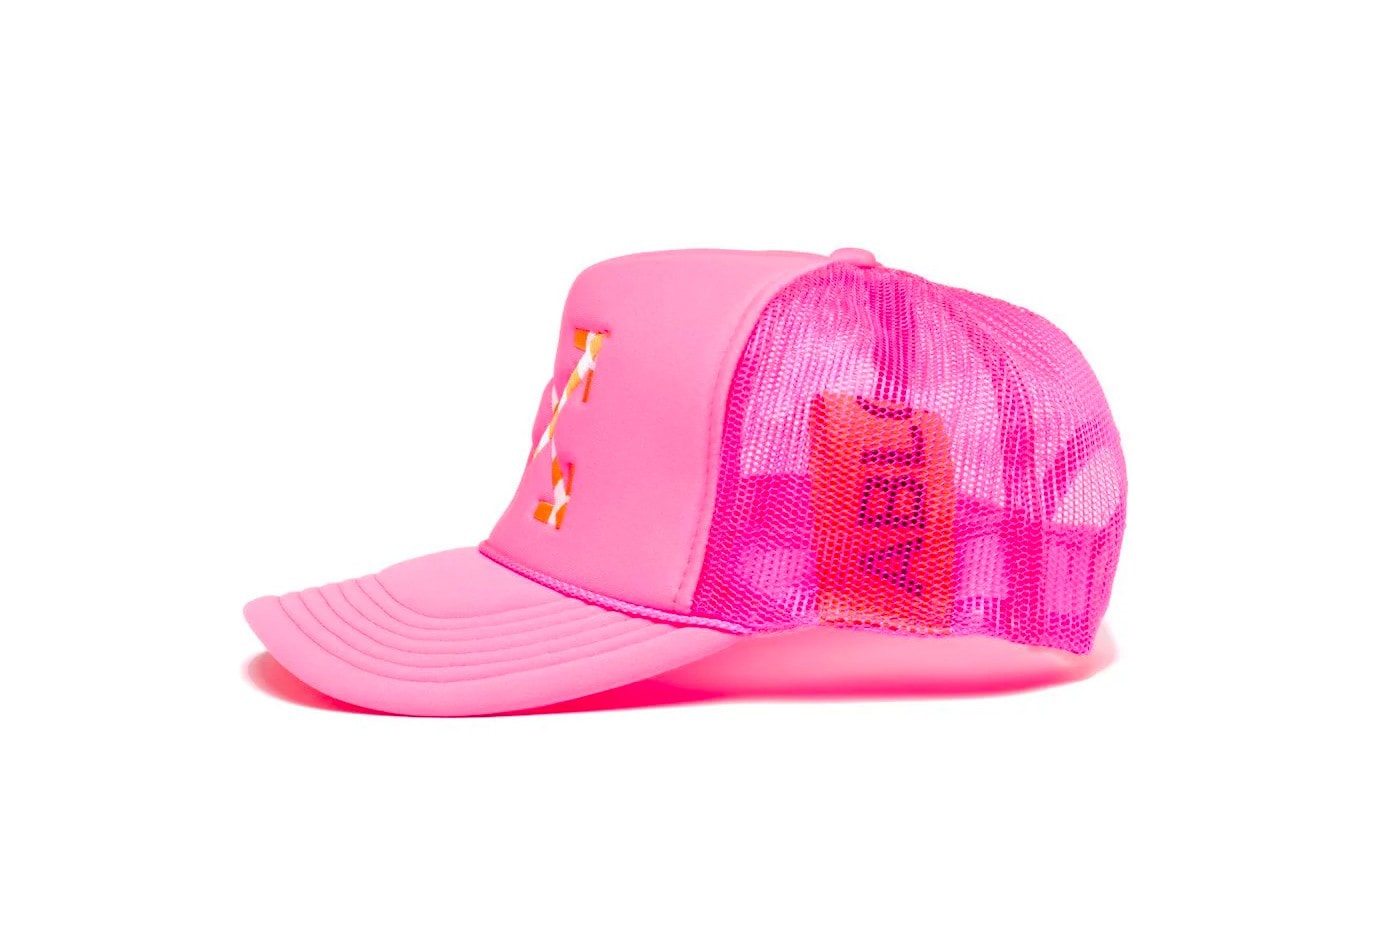 Virgil Abloh x MCA Chicago Figures of Speech Neon Collection Hat Pink